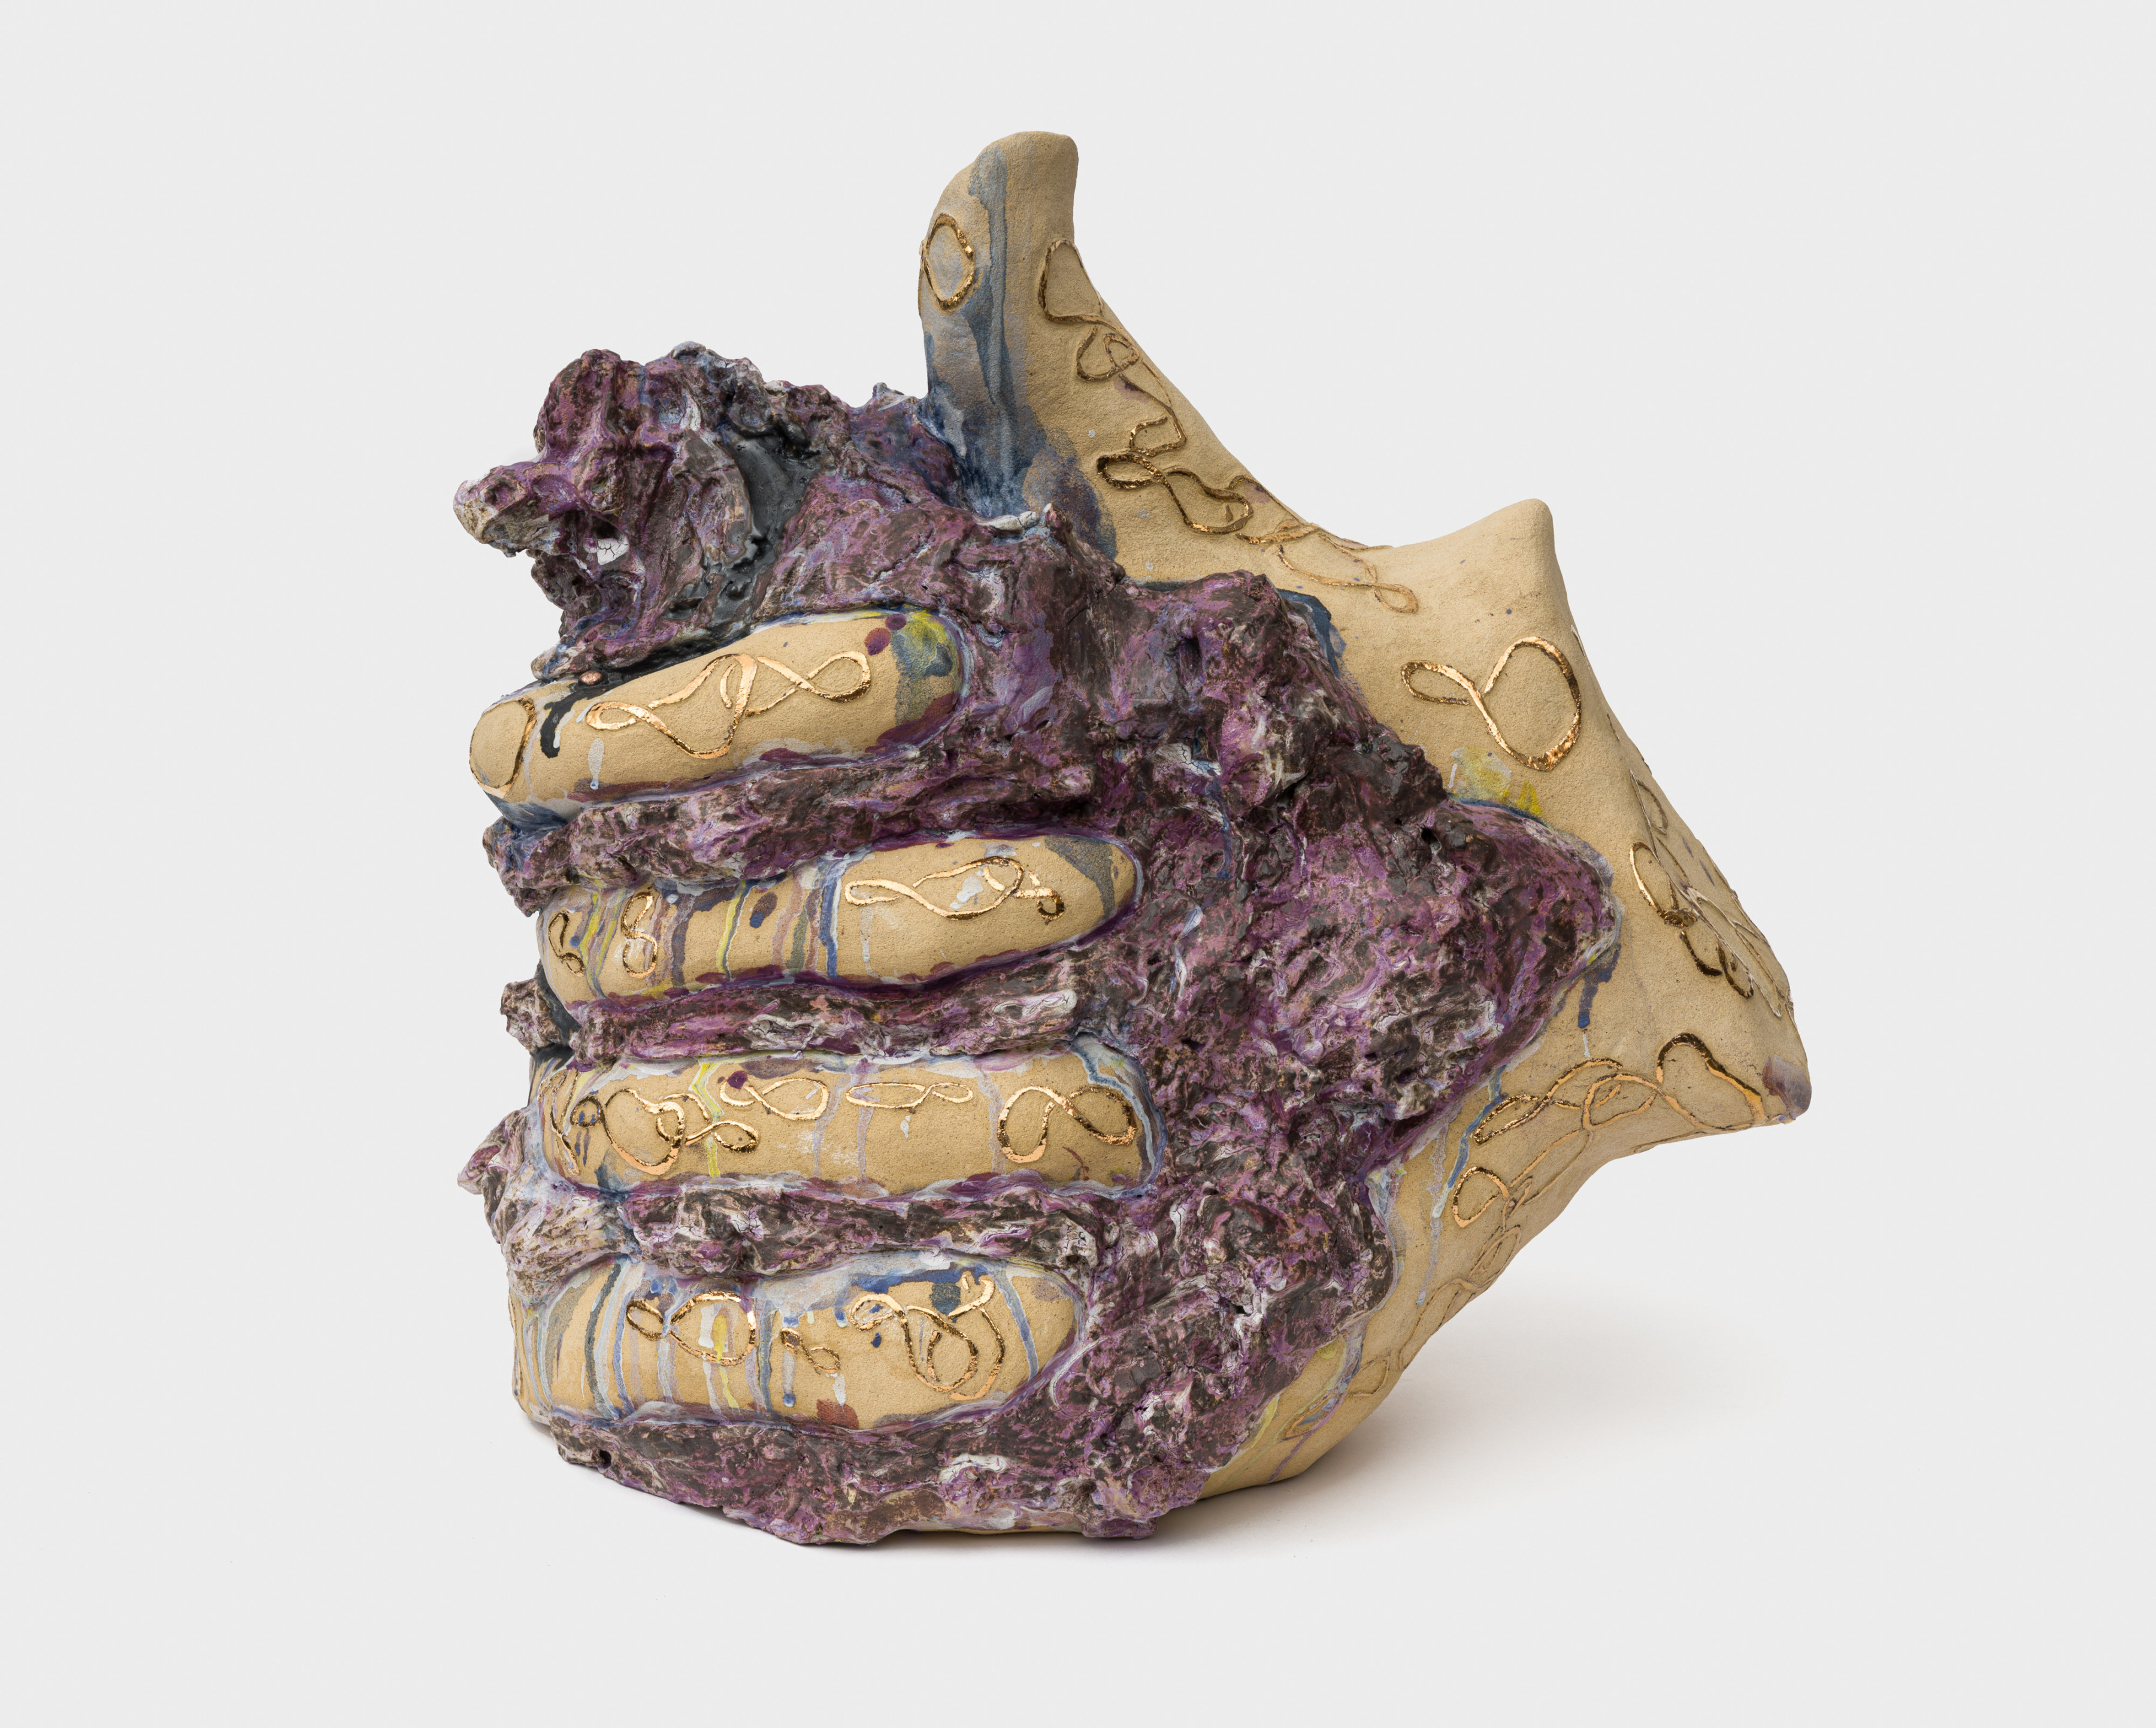 A ceramic sculpture of a hand covered in golden infinity symbols holding an amorphous purple mound.